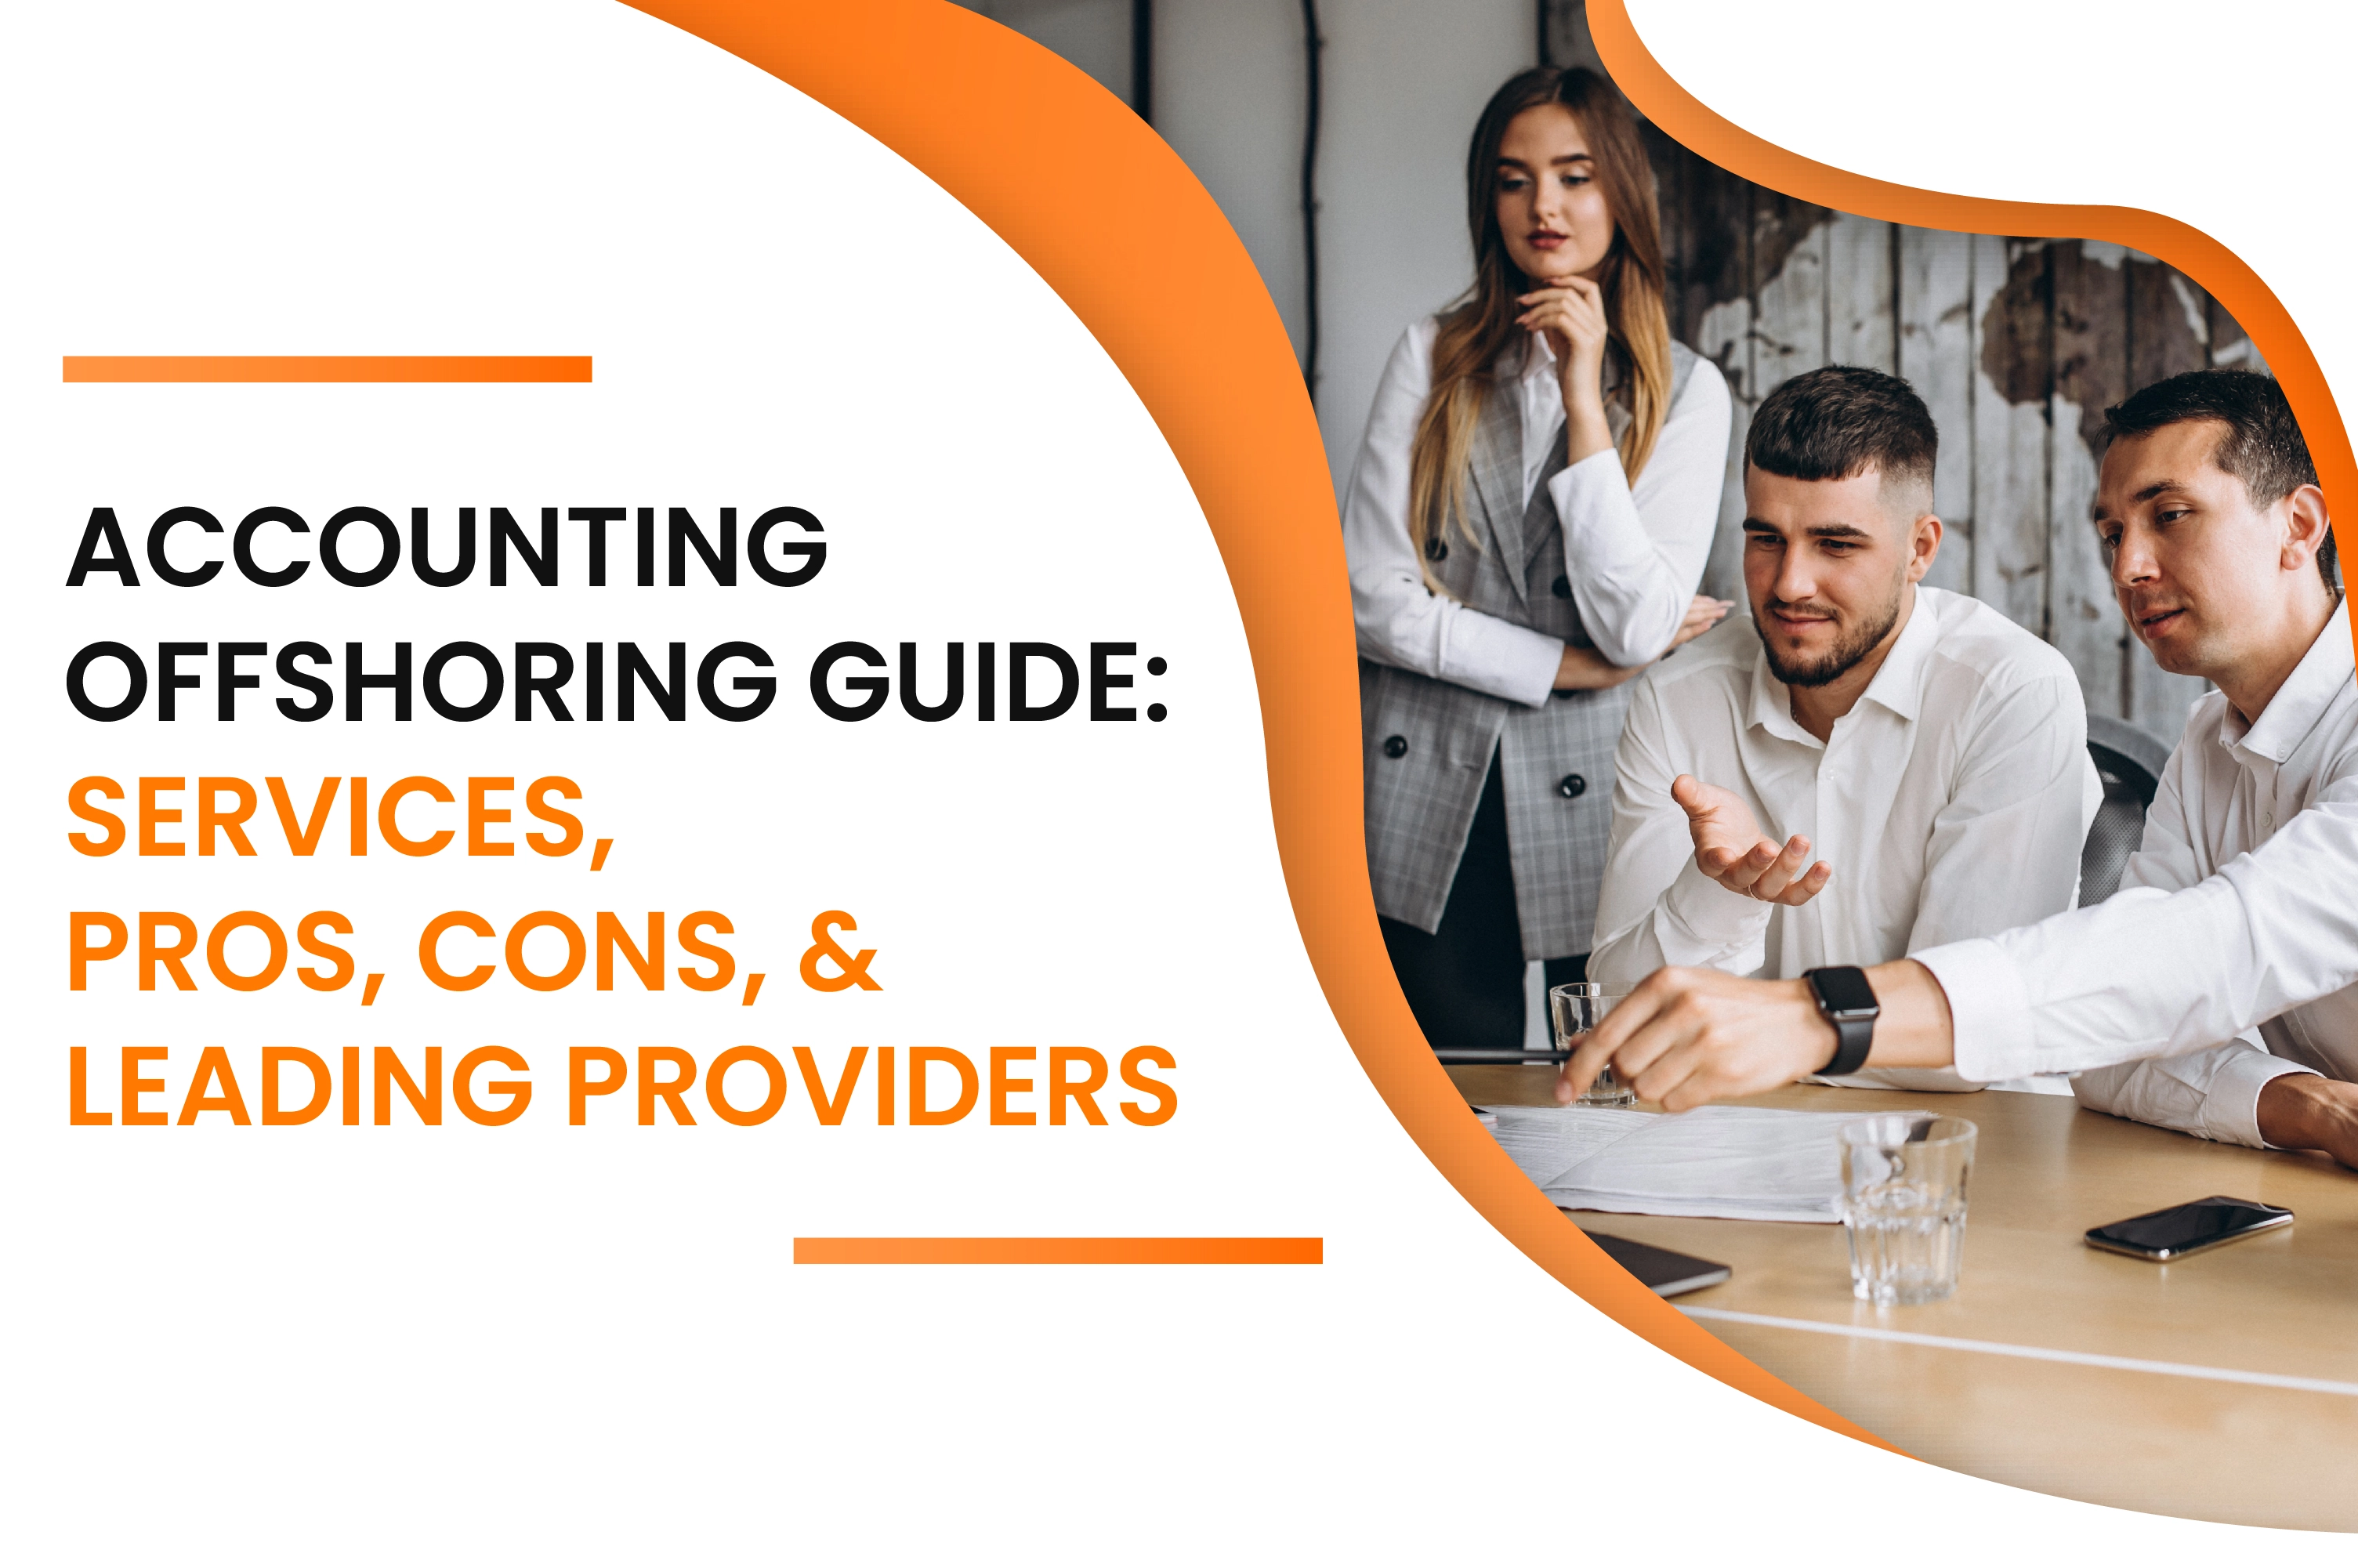 Accounting Offshoring Guide: Services, Pros, Cons, & Leading Providers